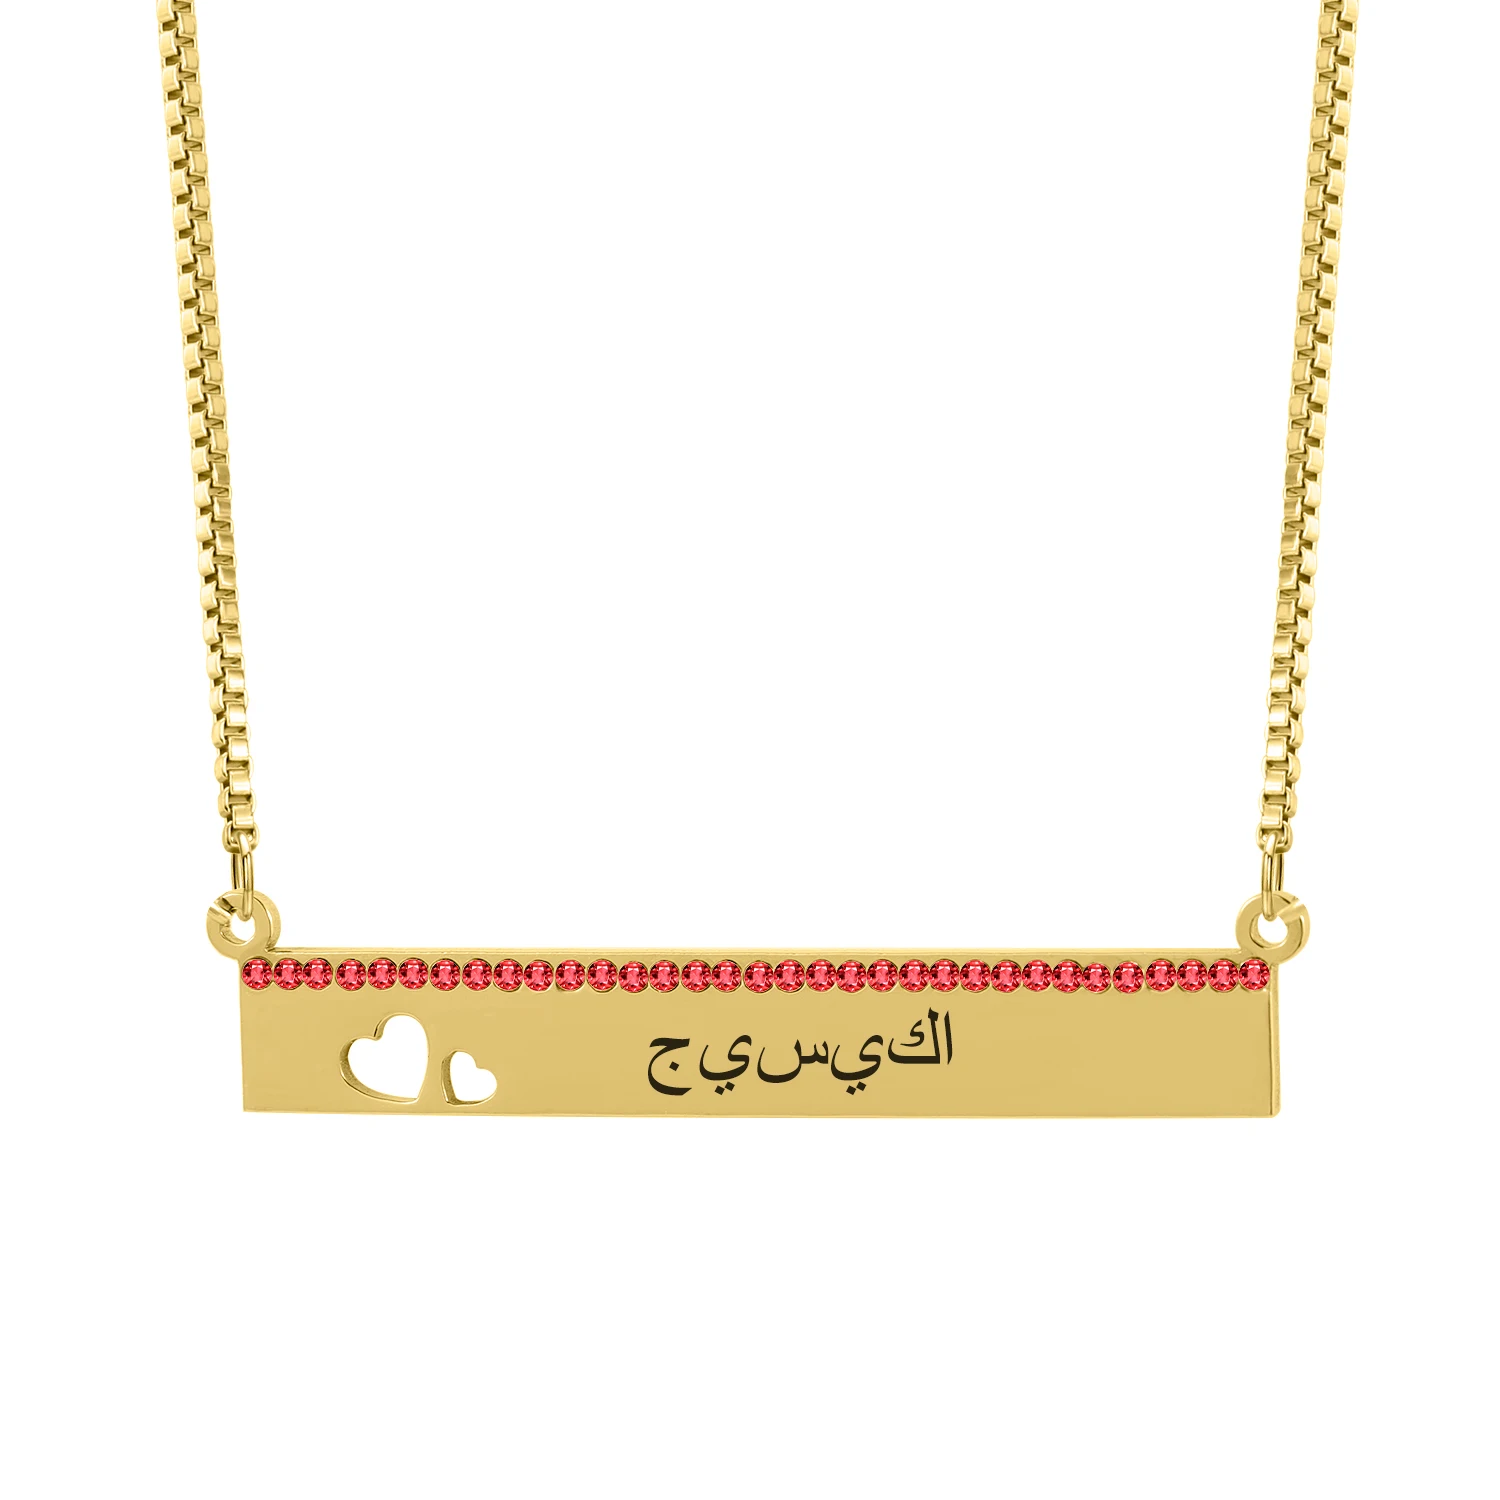 

MYDIY Personalized Arabic Name Necklace Customize Heart Bar Jewelry Engraved Nameplate Pendant Iced out Initial Choker For Women